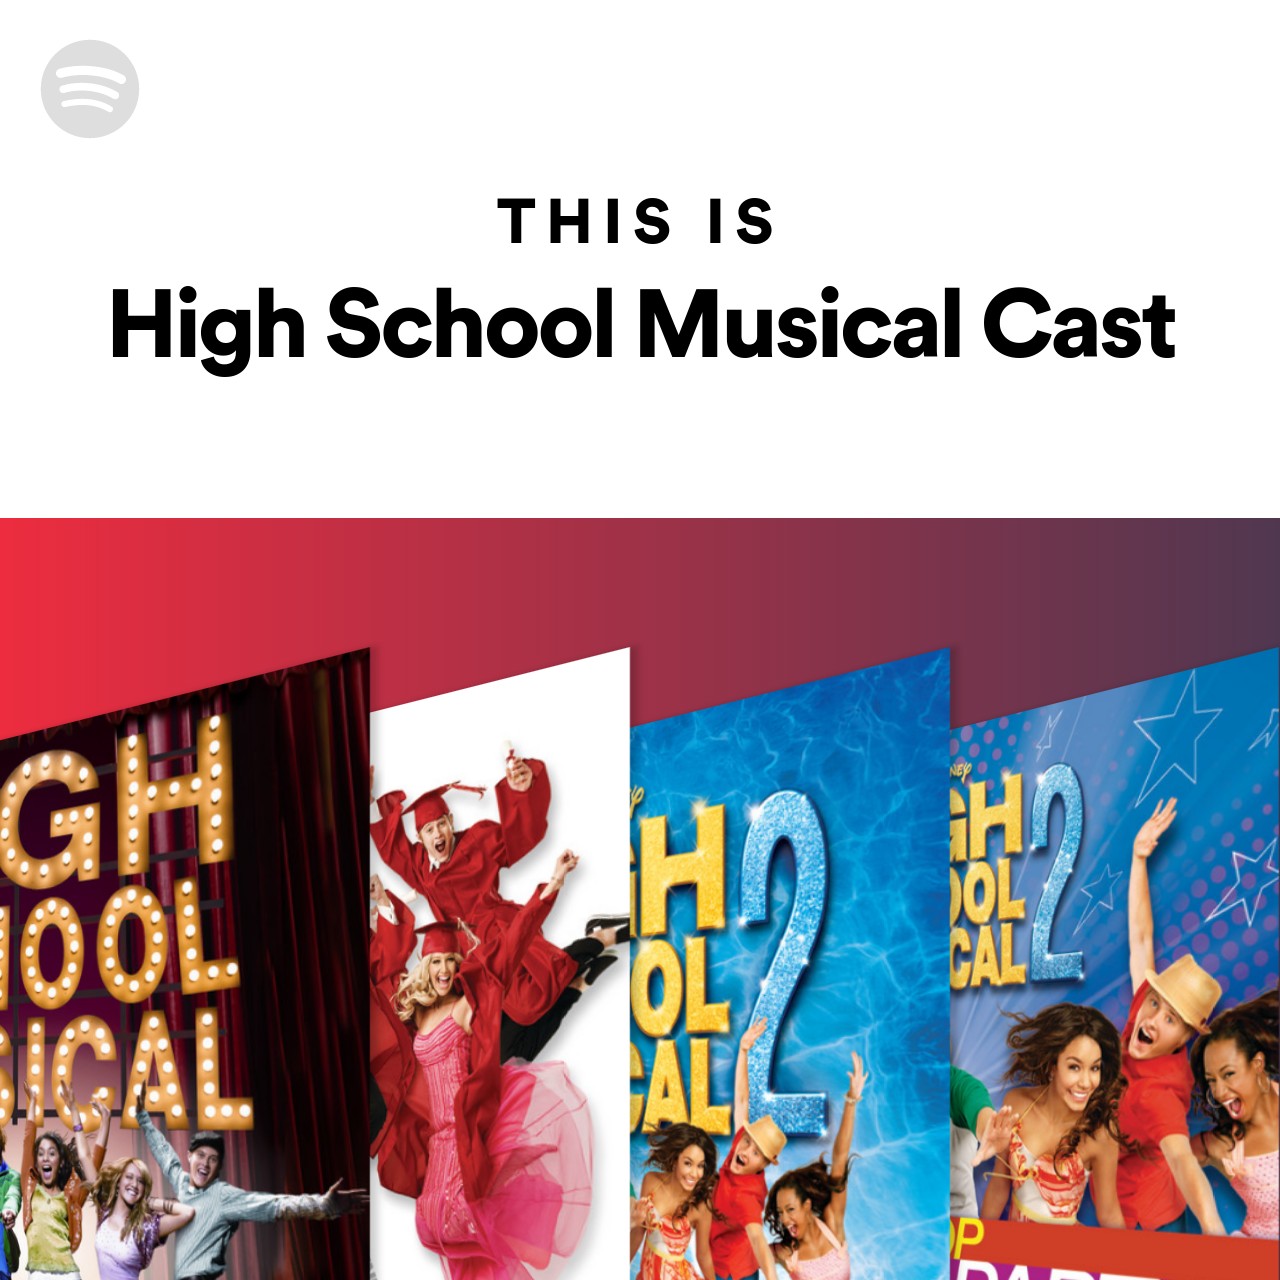 This Is High School Musical Cast